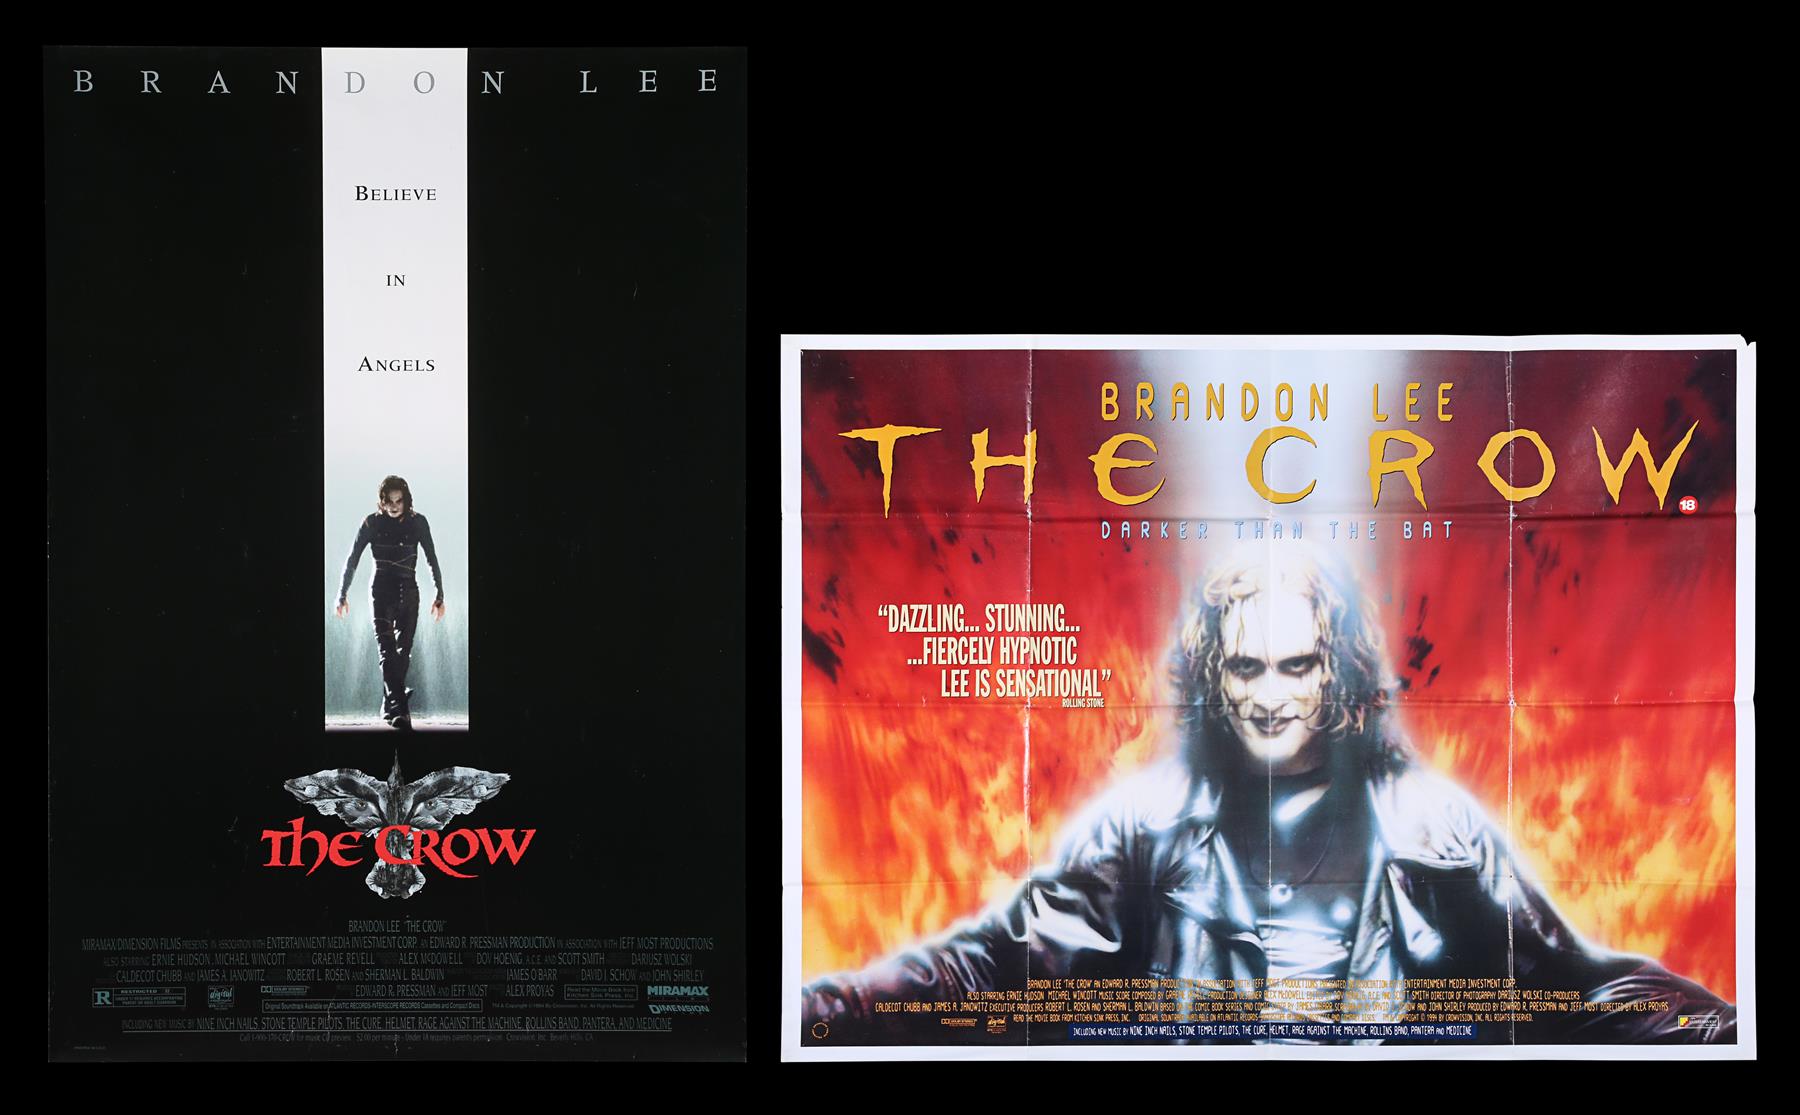 THE CROW (1994) - US One-Sheet and UK Quad, 1994